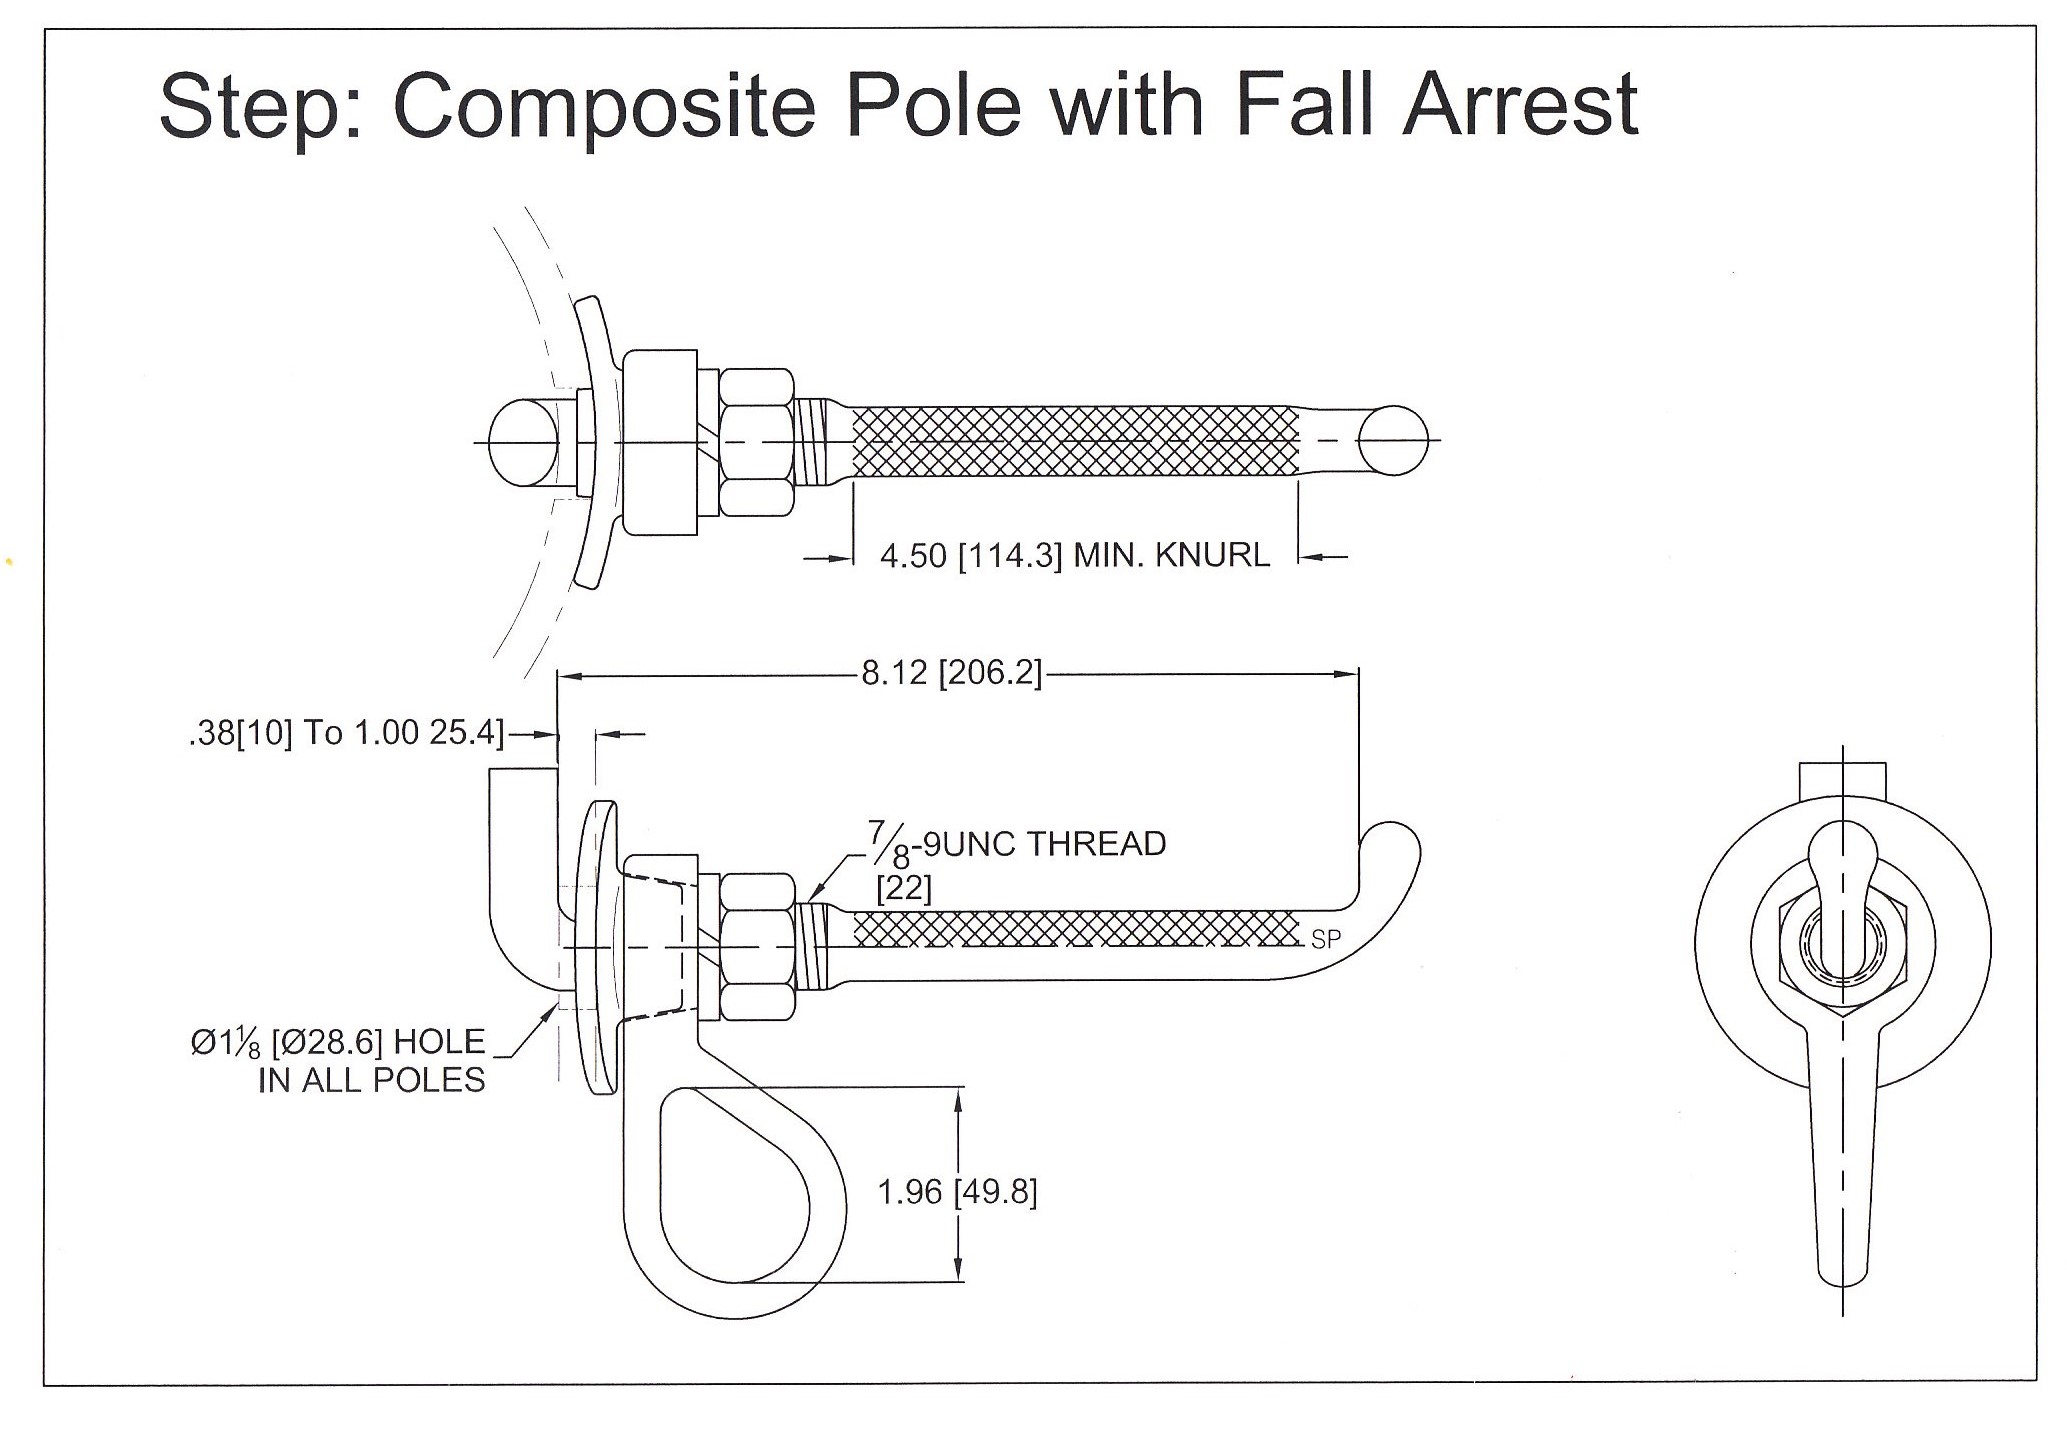 STEP COMPOSITE POLE WITH ARREST.jpg